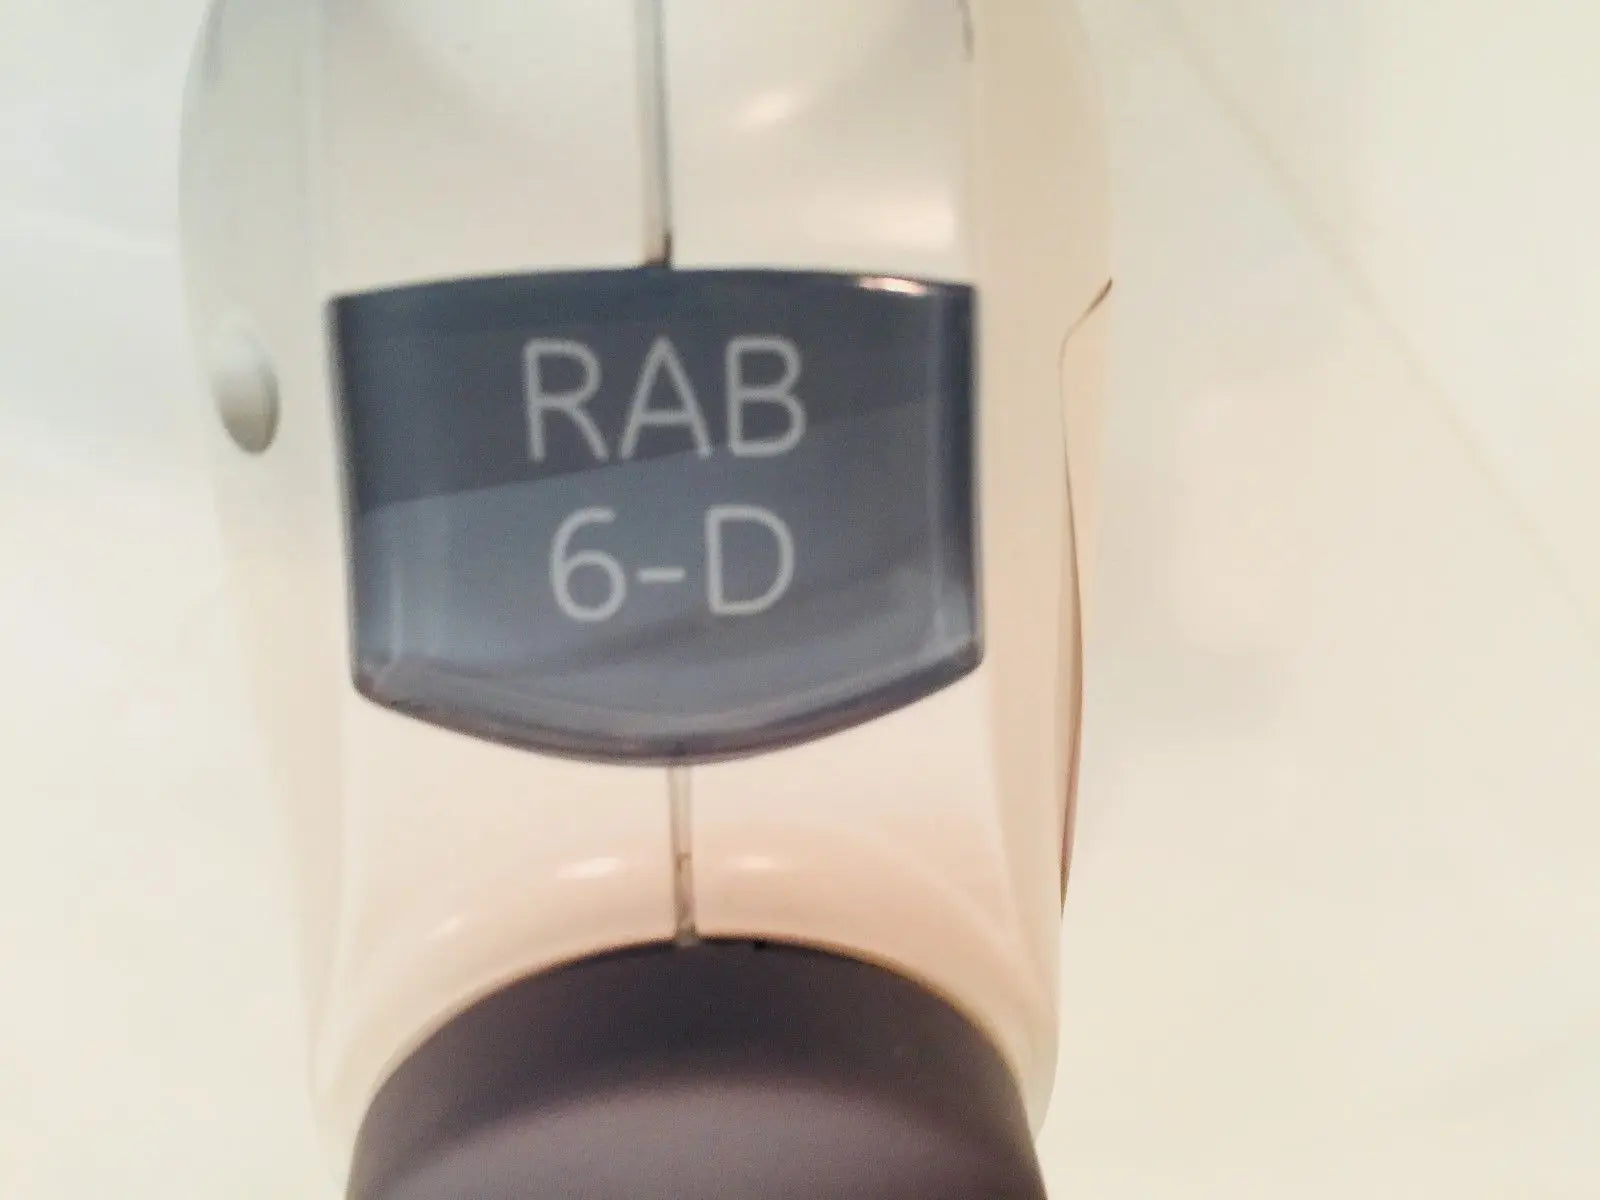 GE RAB6 - D Ultrasound 2D/3D/4D Convex Curved Probe / Transducer DIAGNOSTIC ULTRASOUND MACHINES FOR SALE